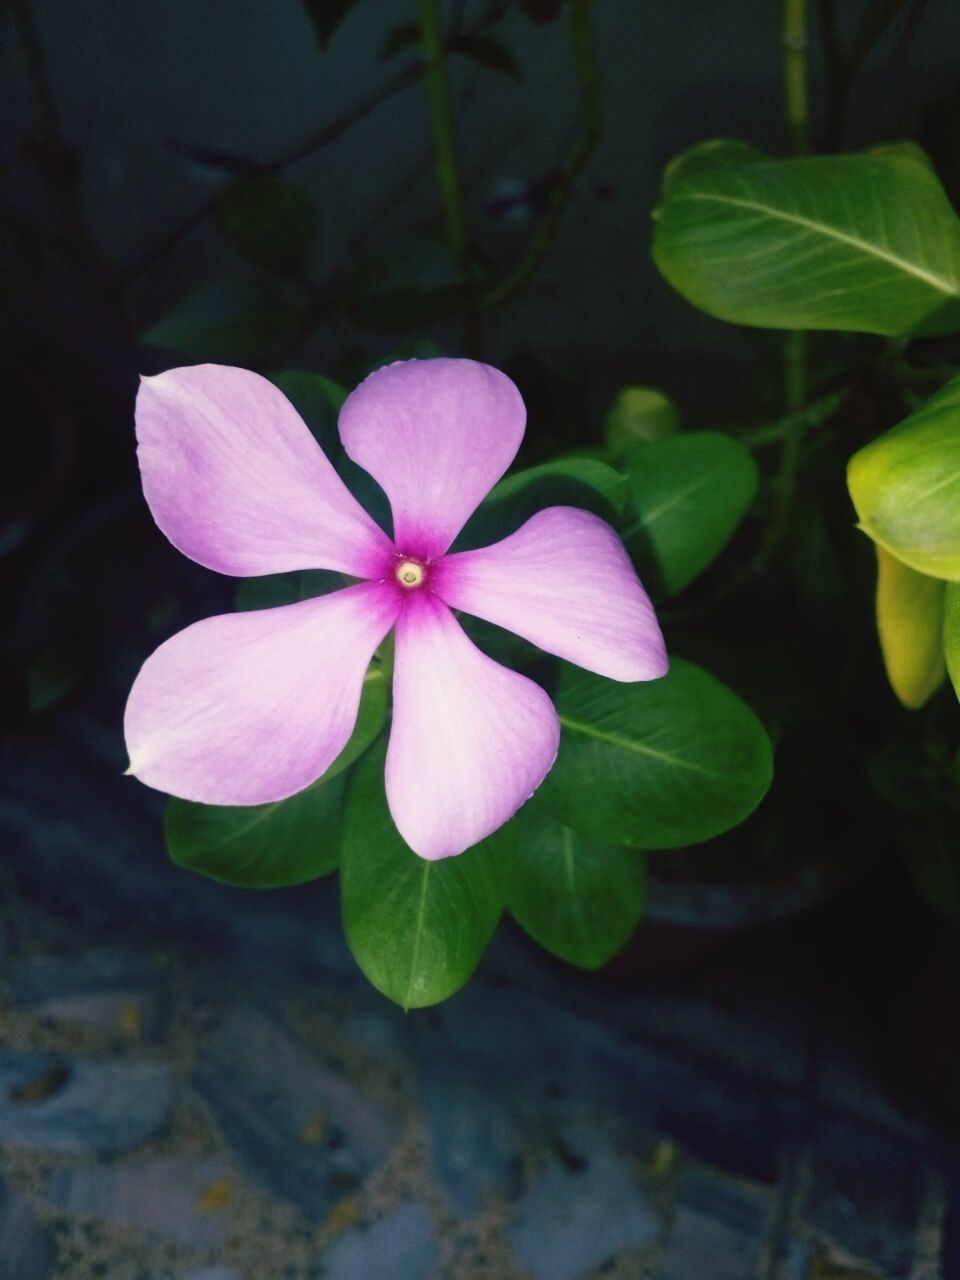 CLOSE-UP OF FRESH PINK FLOWER BLOOMING IN PLANT